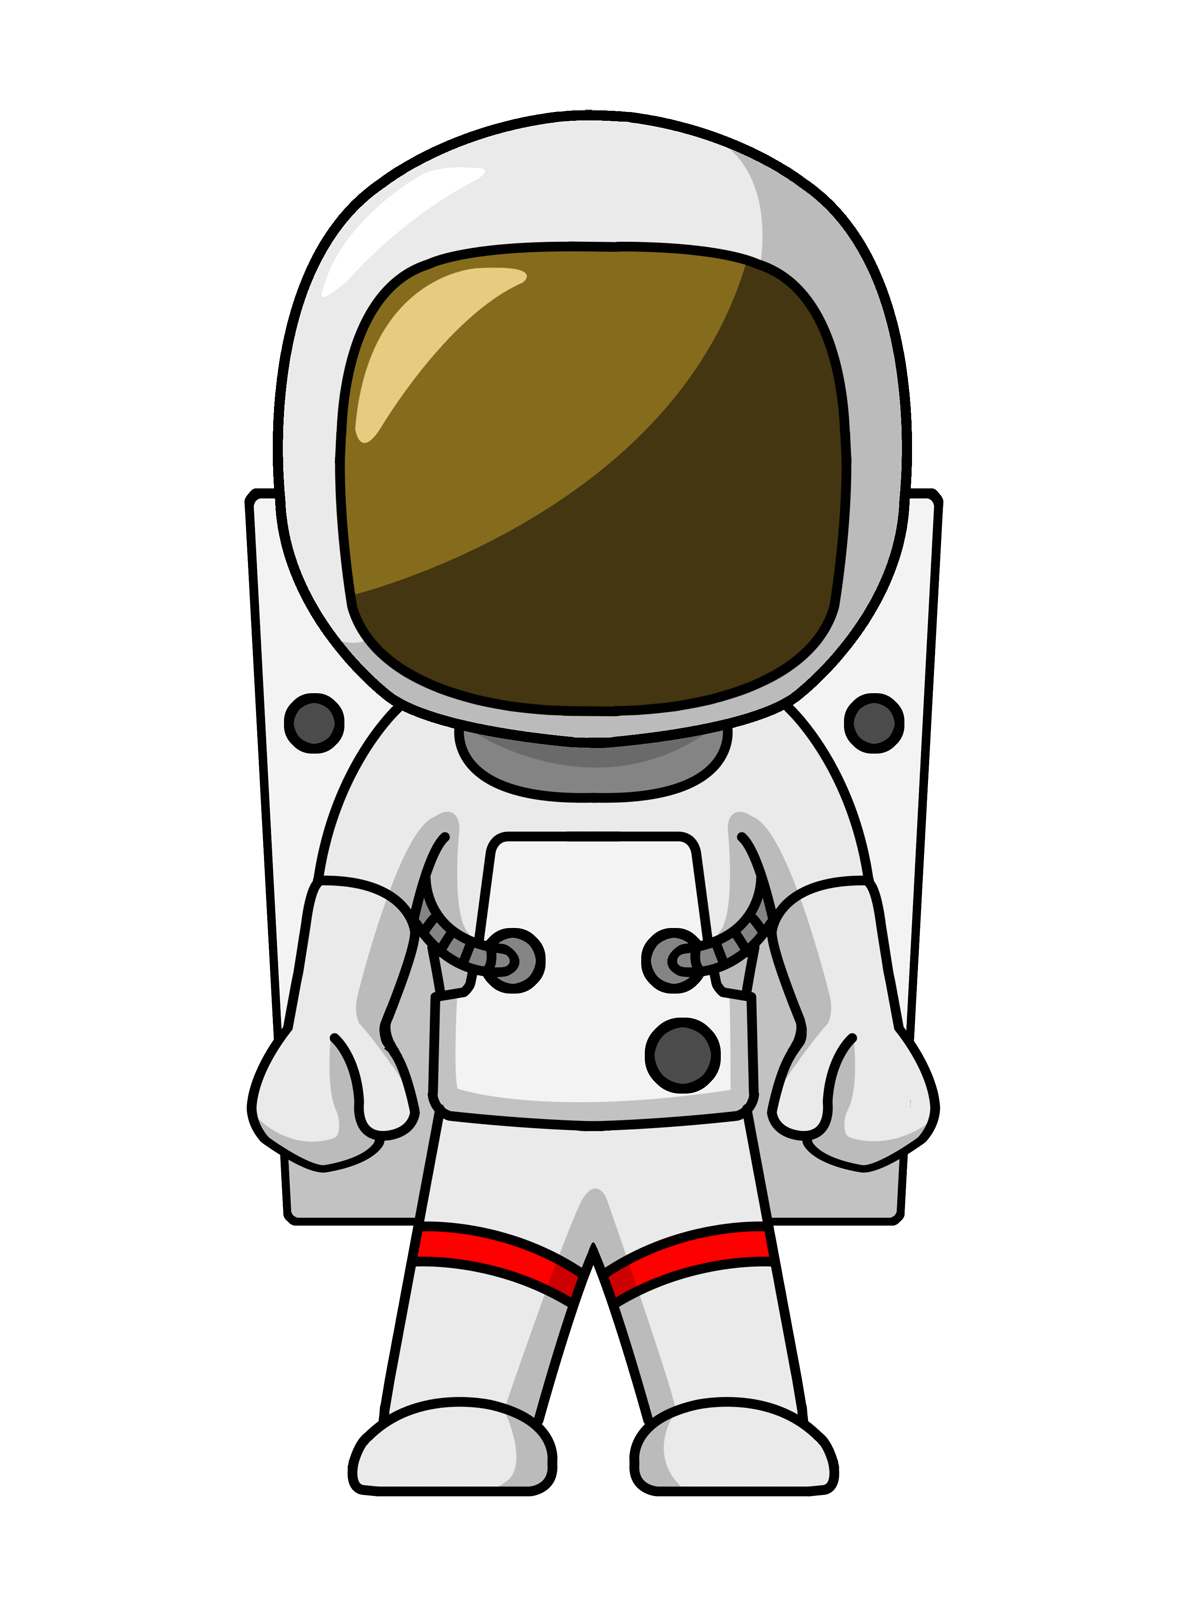 Finest collection of free to use astronaut clip art